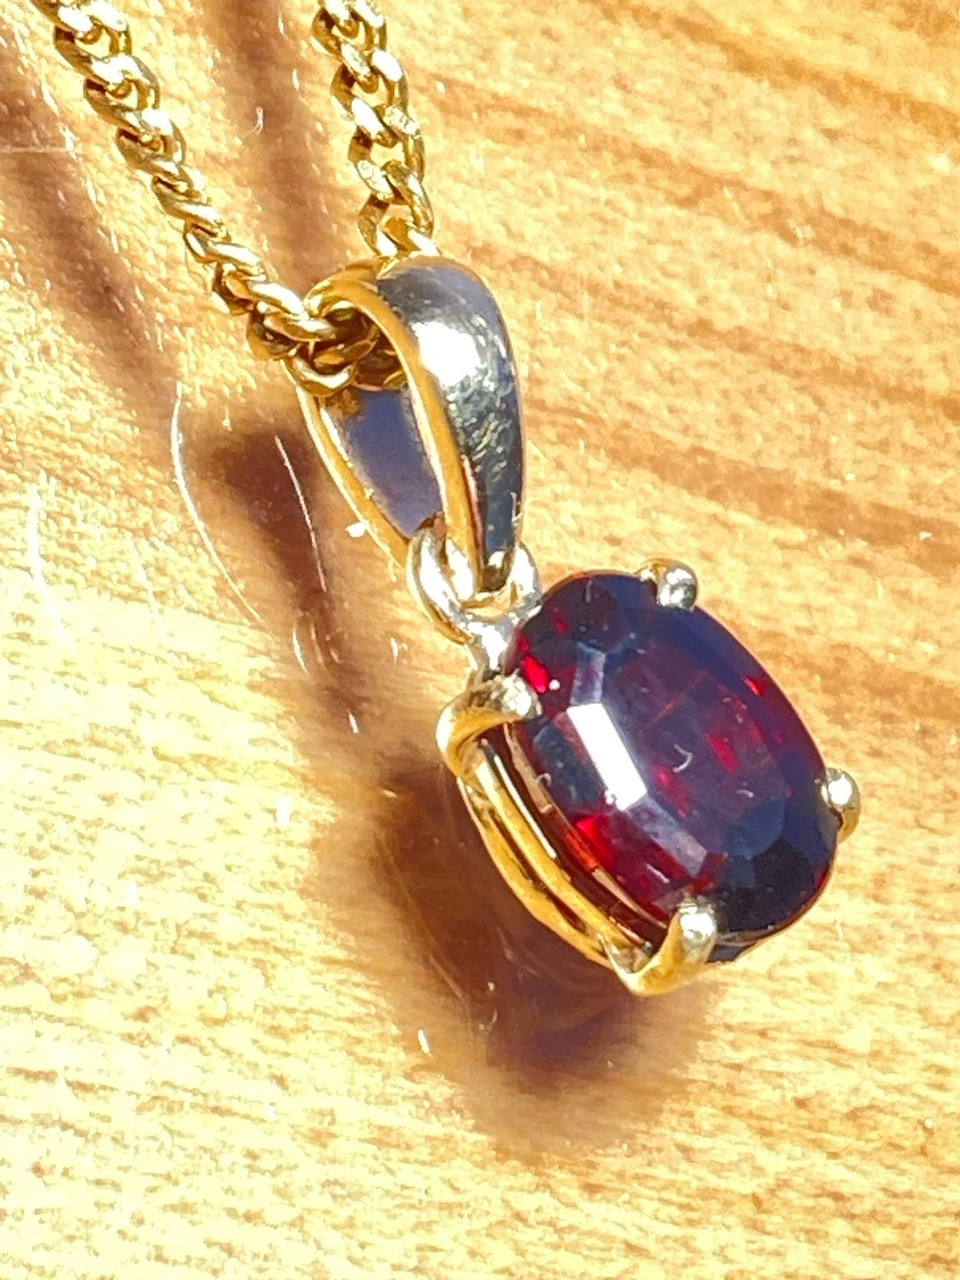 A close-up of a gold pendant with a dark red gem in the middle